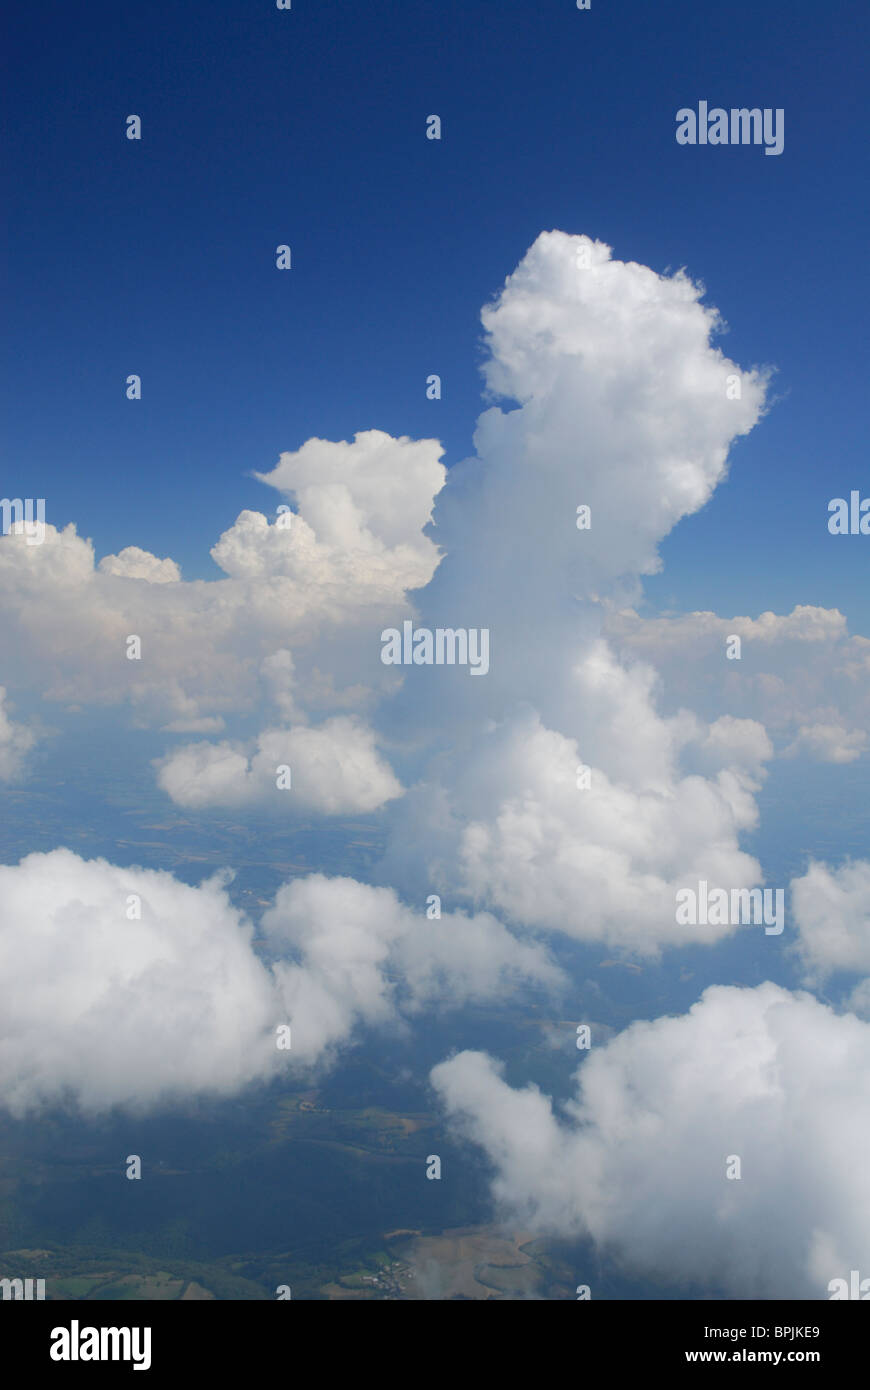 Aerial view of a Congestus (Cg) cloud and Cumulus (Cu) clouds, France Stock Photo